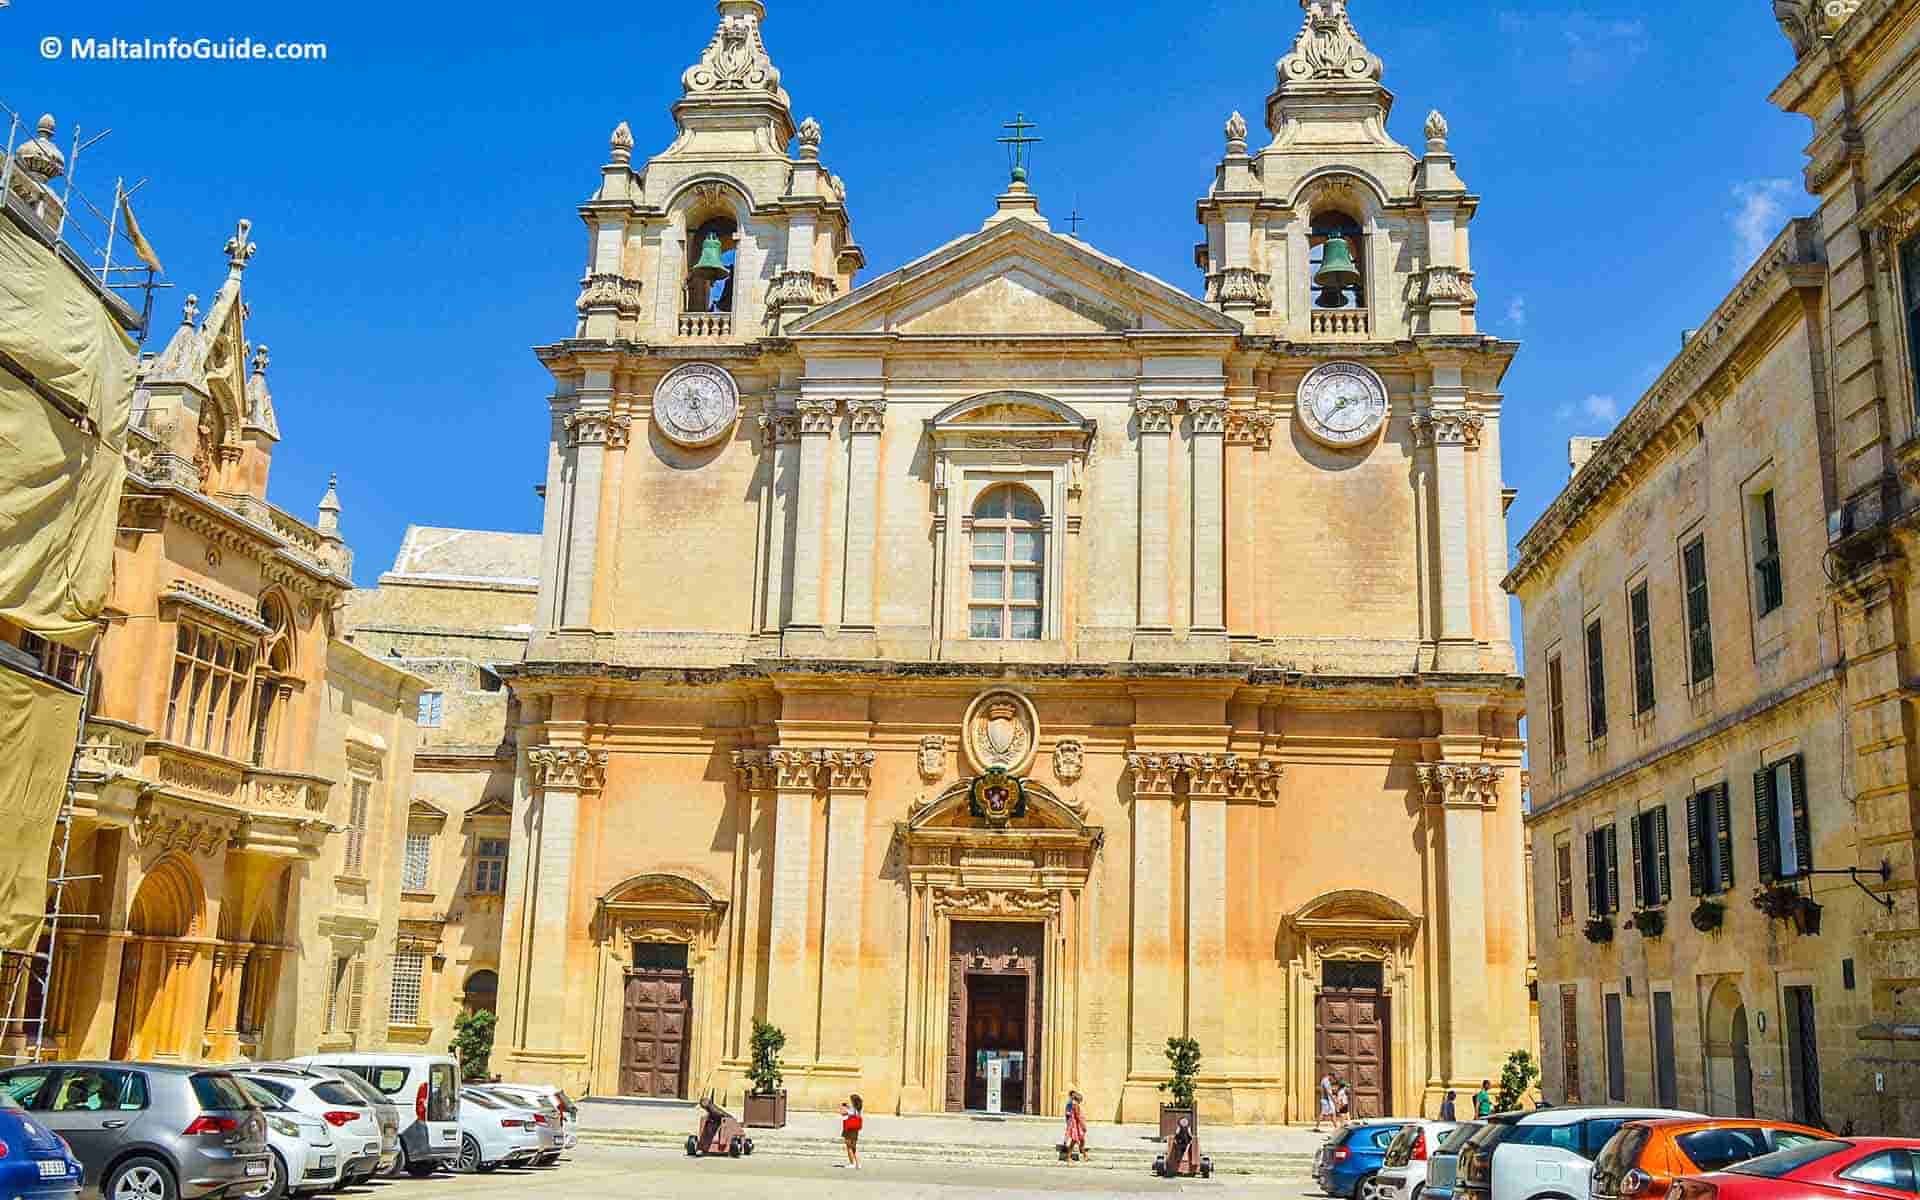 The cathedral is one of our day trip to Mdina places of interest.